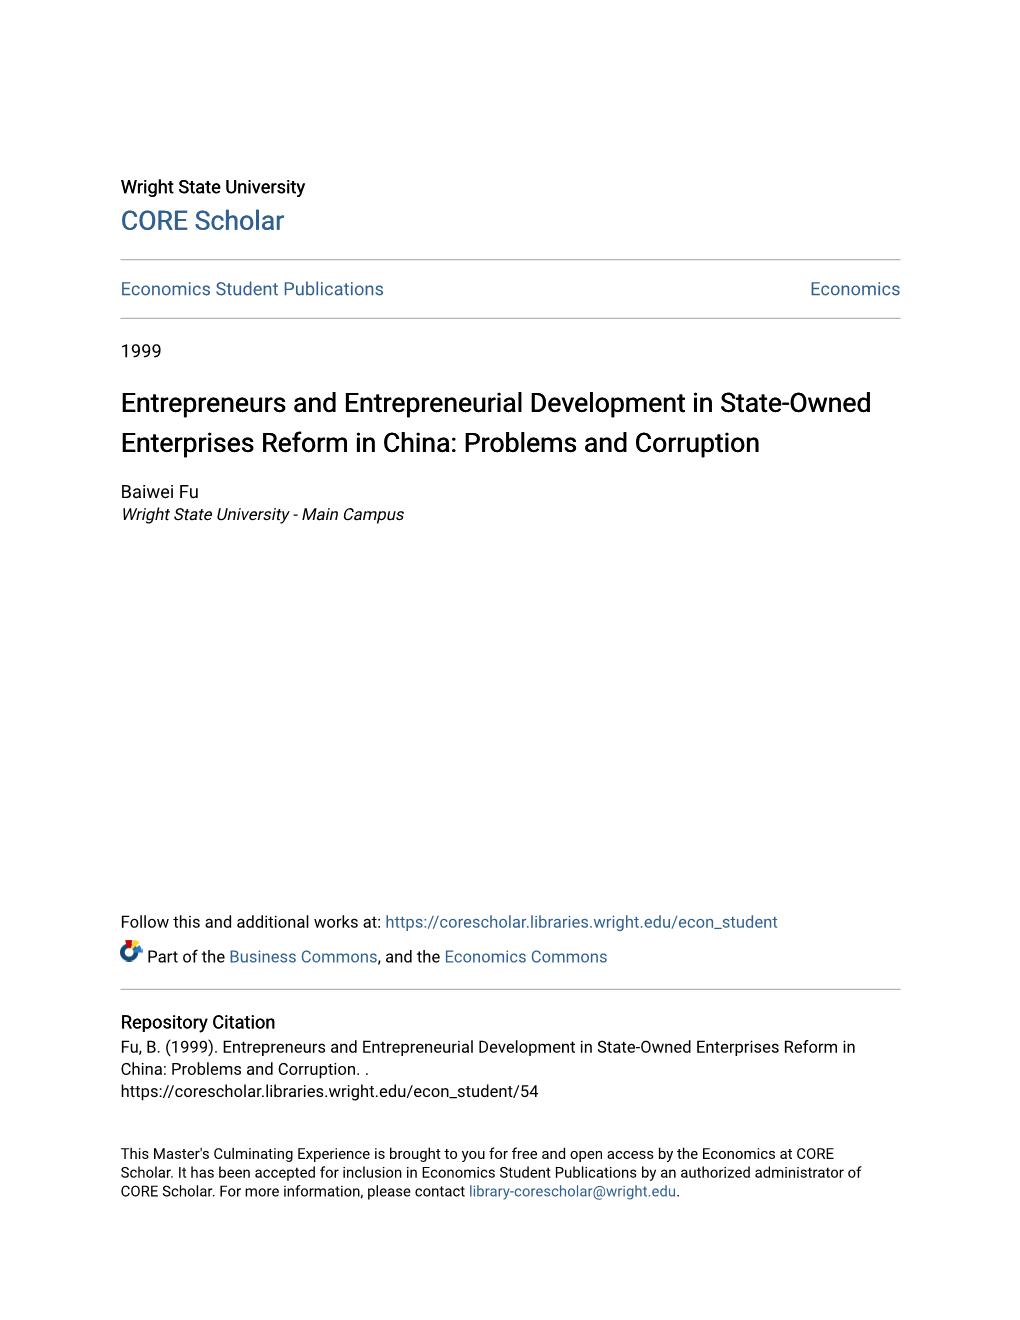 Entrepreneurs and Entrepreneurial Development in State-Owned Enterprises Reform in China: Problems and Corruption